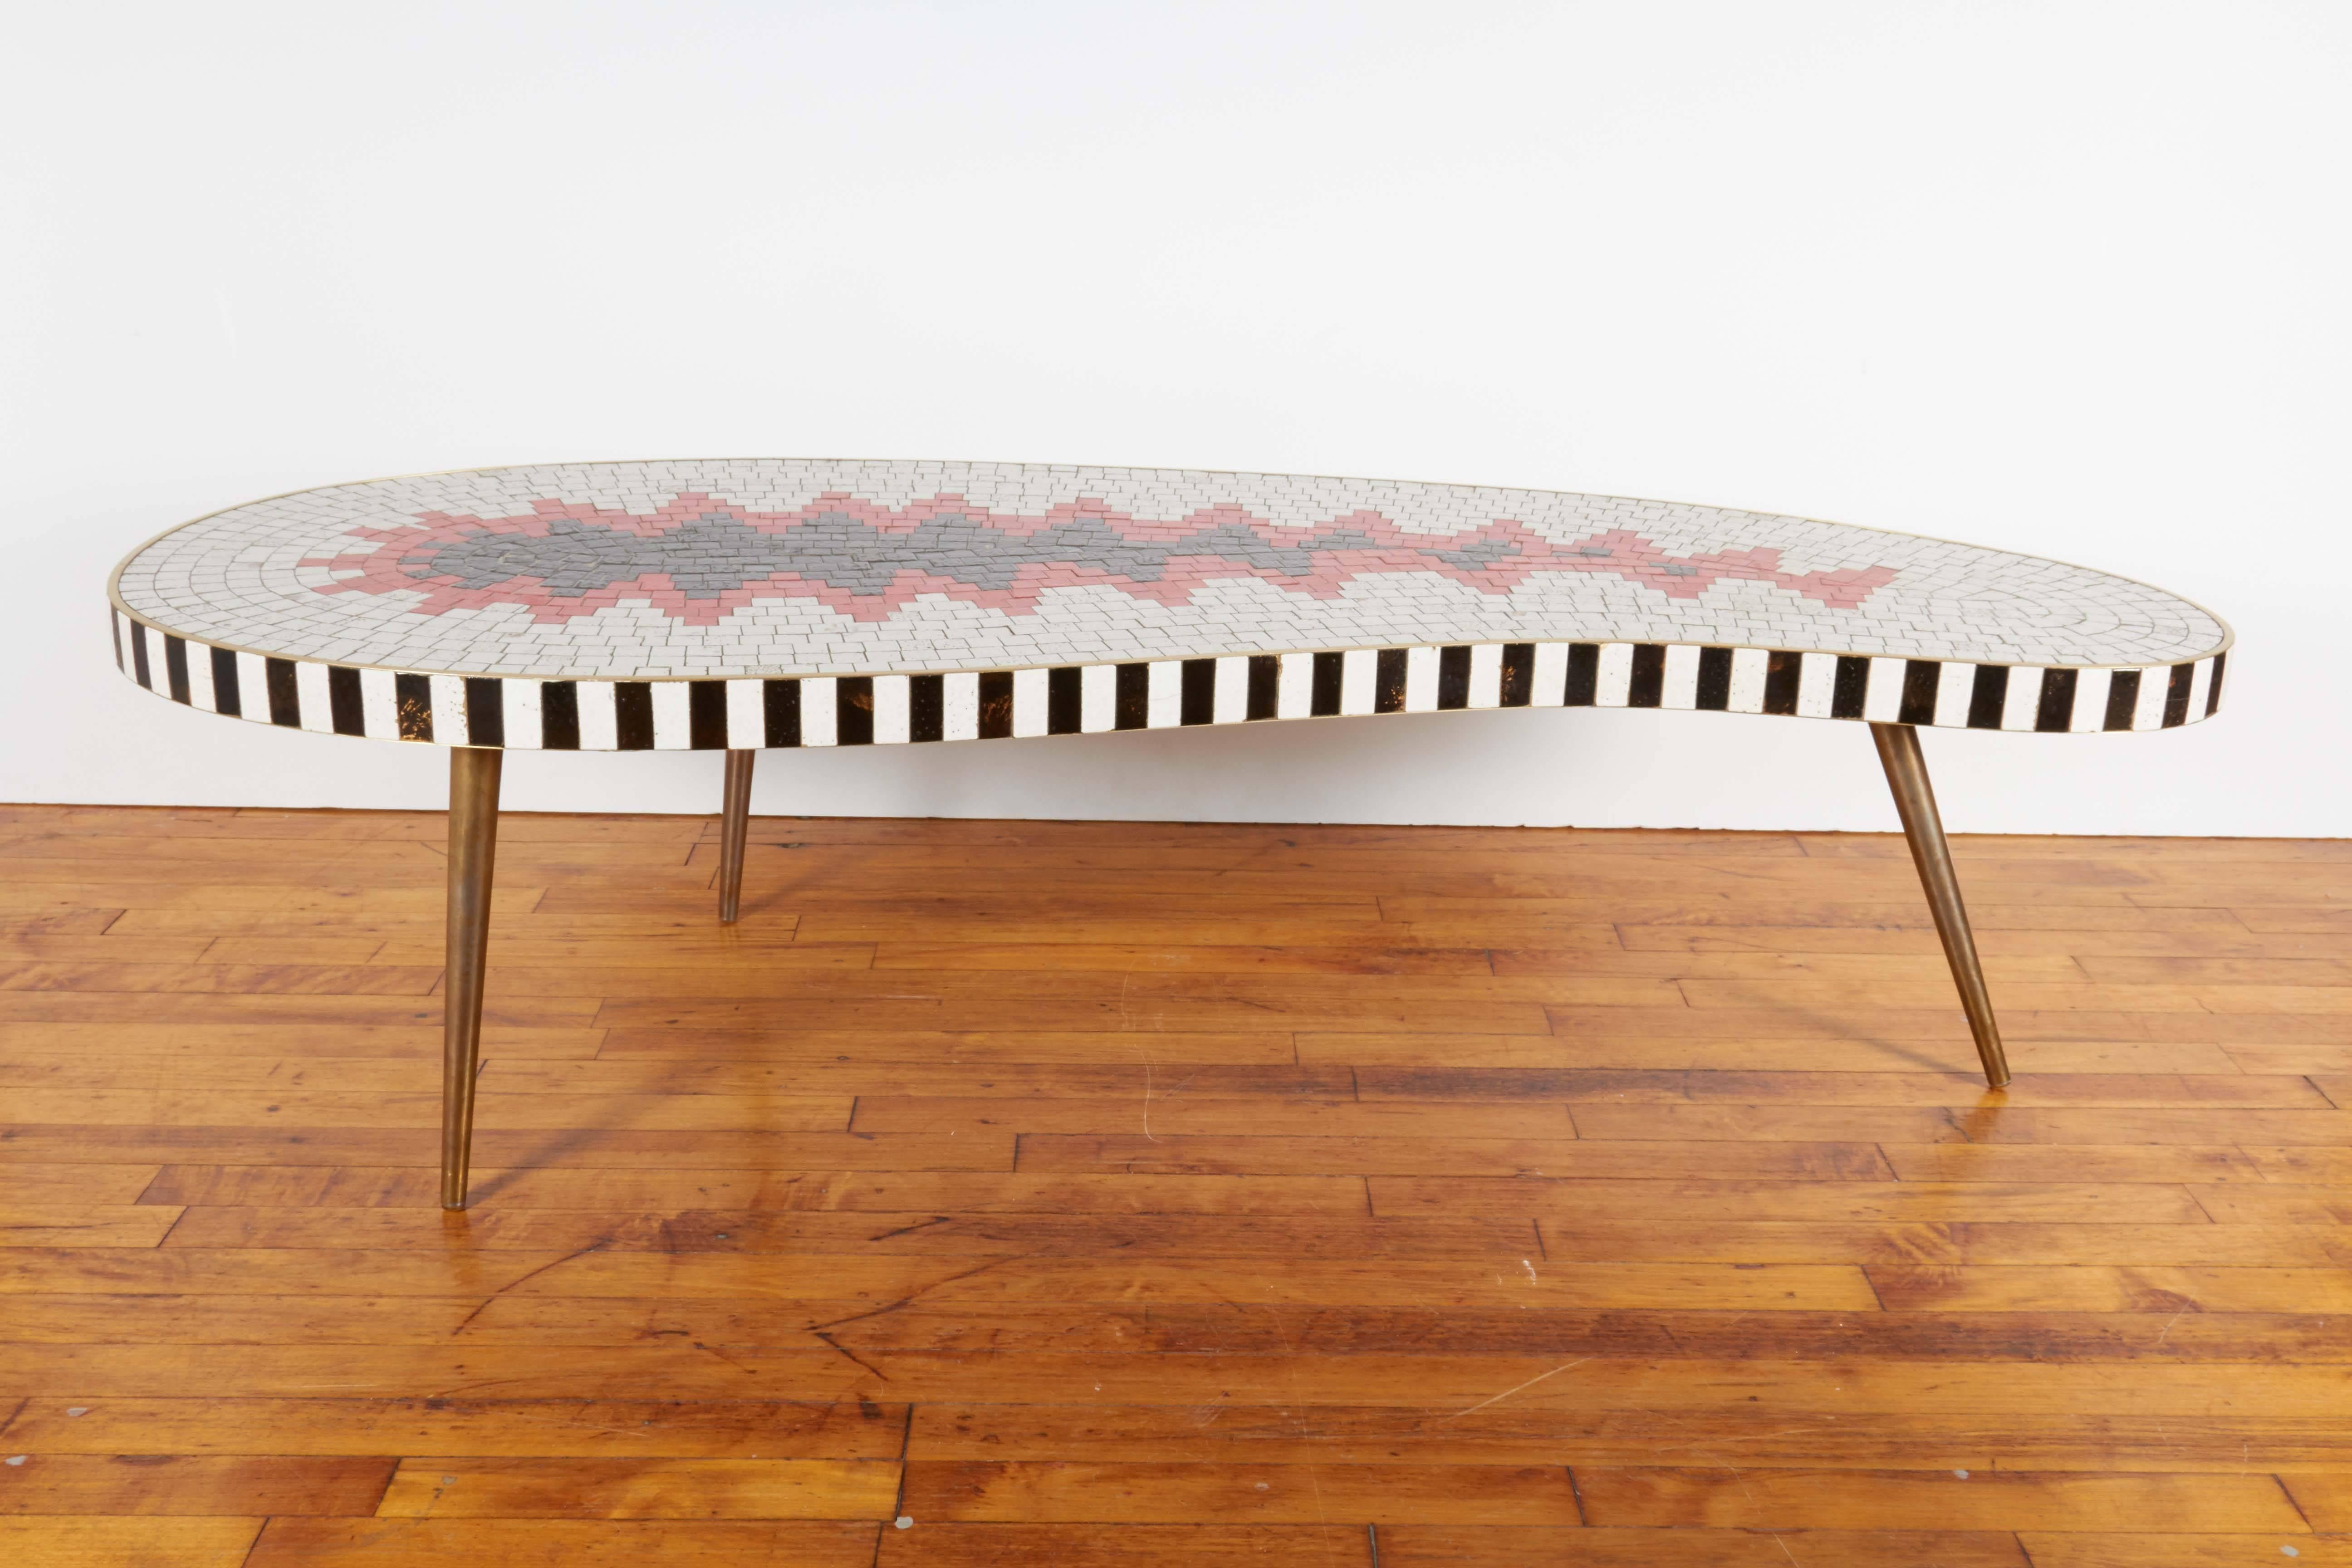 A kidney form coffee table, circa 1960s with mosaic top, composed of glazed ceramic tiles, in white, black and red, bordered by black and white pattern, set within a brass frame, on three tapered steel legs. The table remains in good vintage